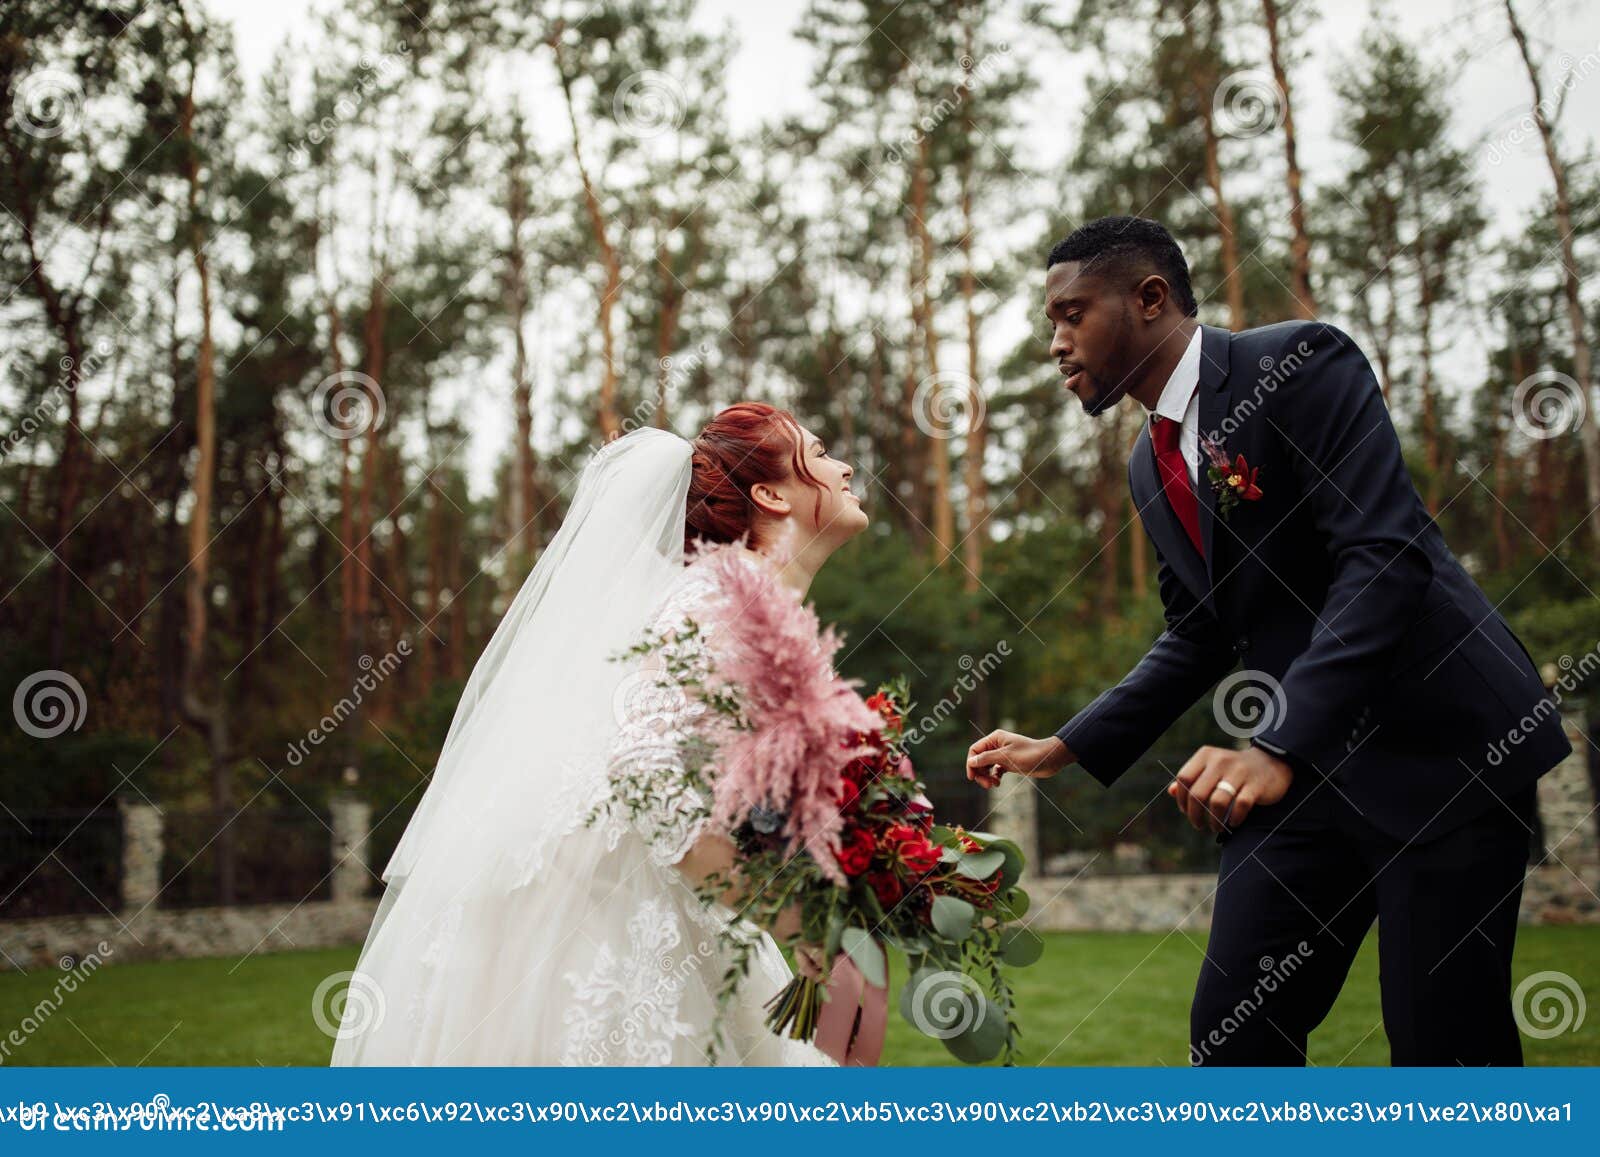 https://thumbs.dreamstime.com/z/overjoyed-couple-dancing-handsome-african-american-man-lovely-white-woman-wedding-day-beautiful-bride-charming-groom-enjoy-213808769.jpg